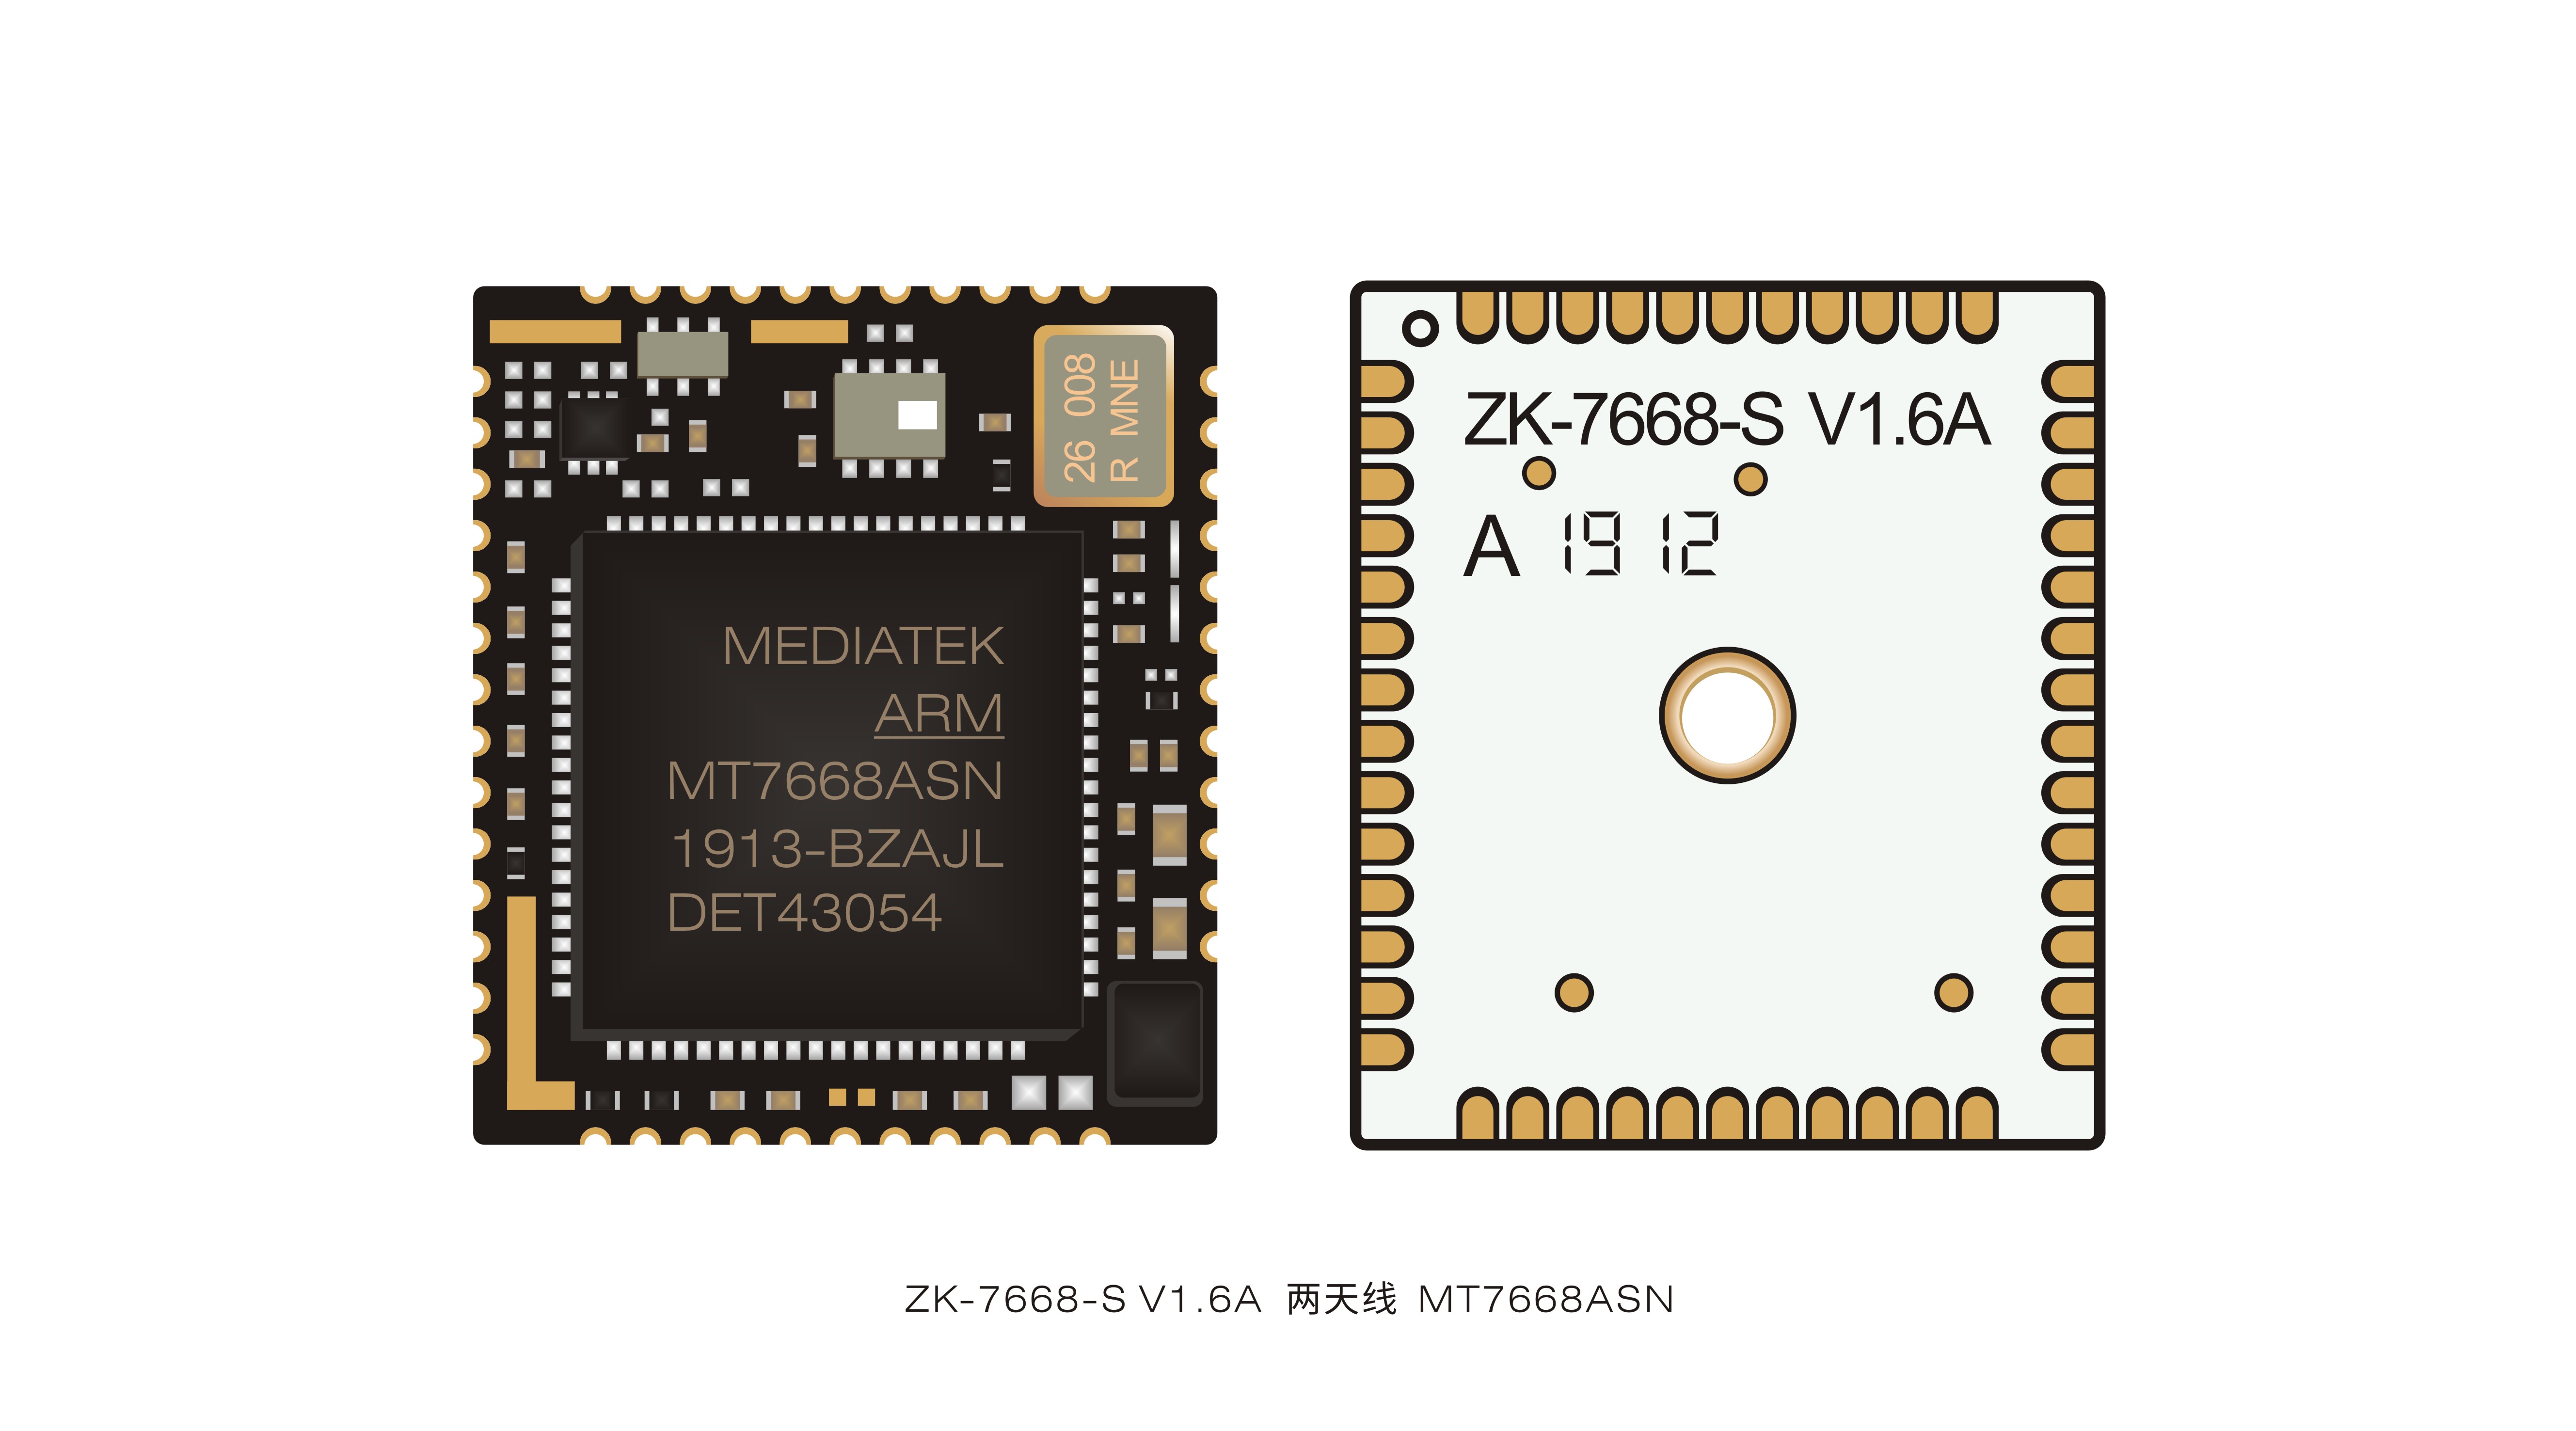 ZK-7668-S V1.6A